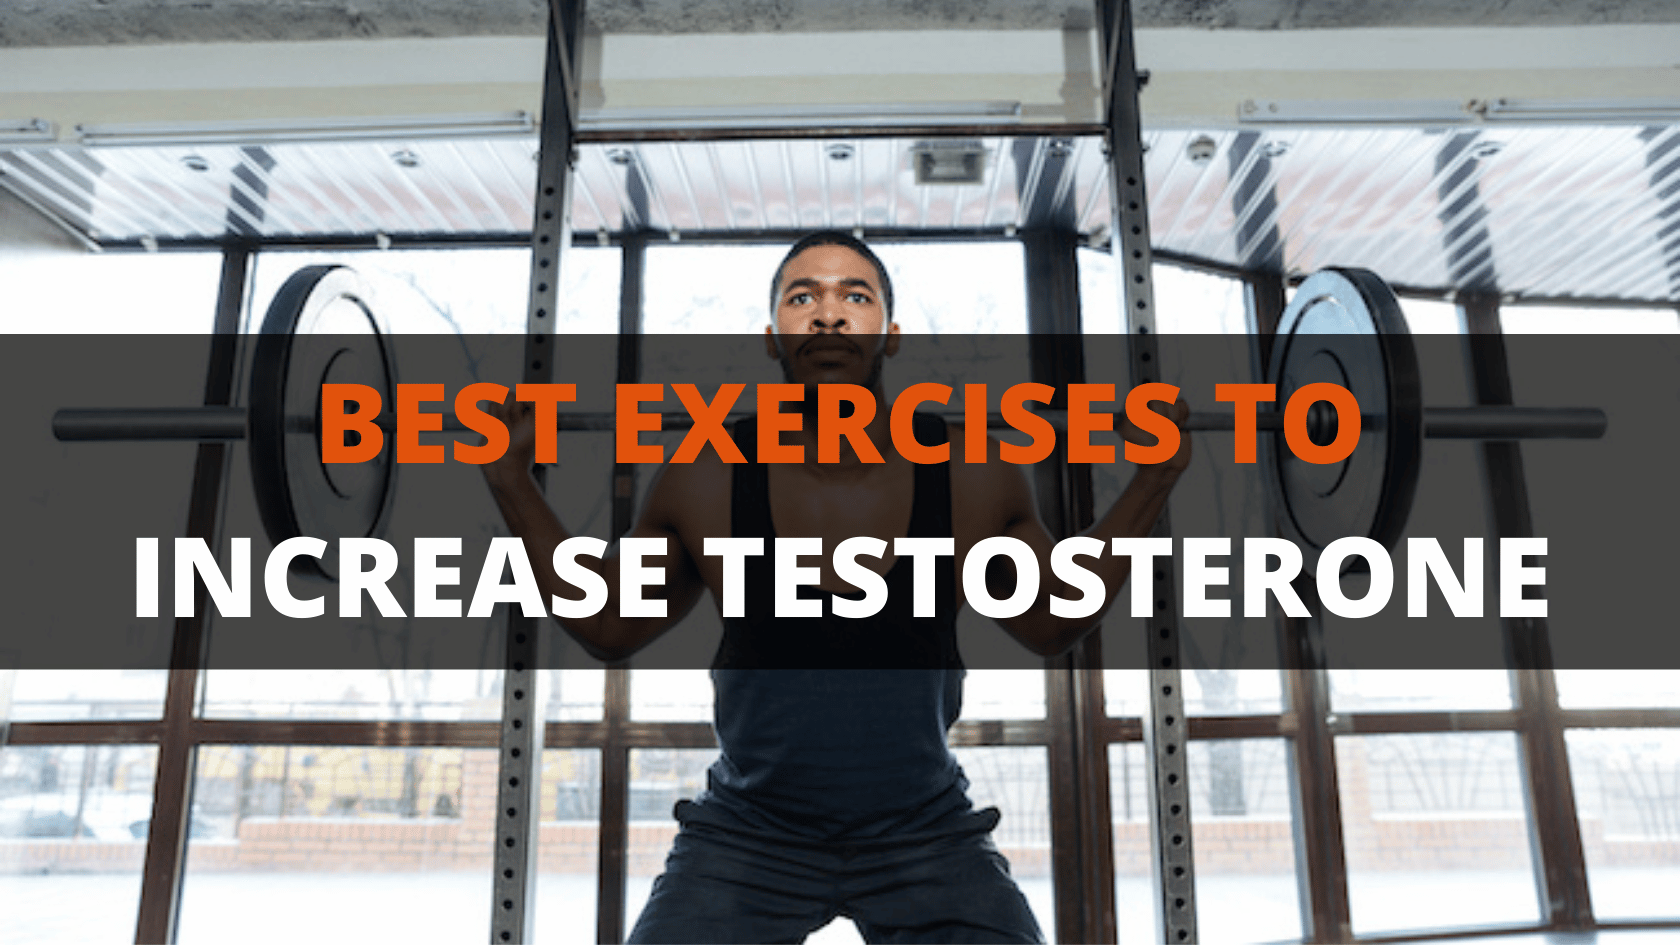 The 3 Best Exercises To Increase Testosterone